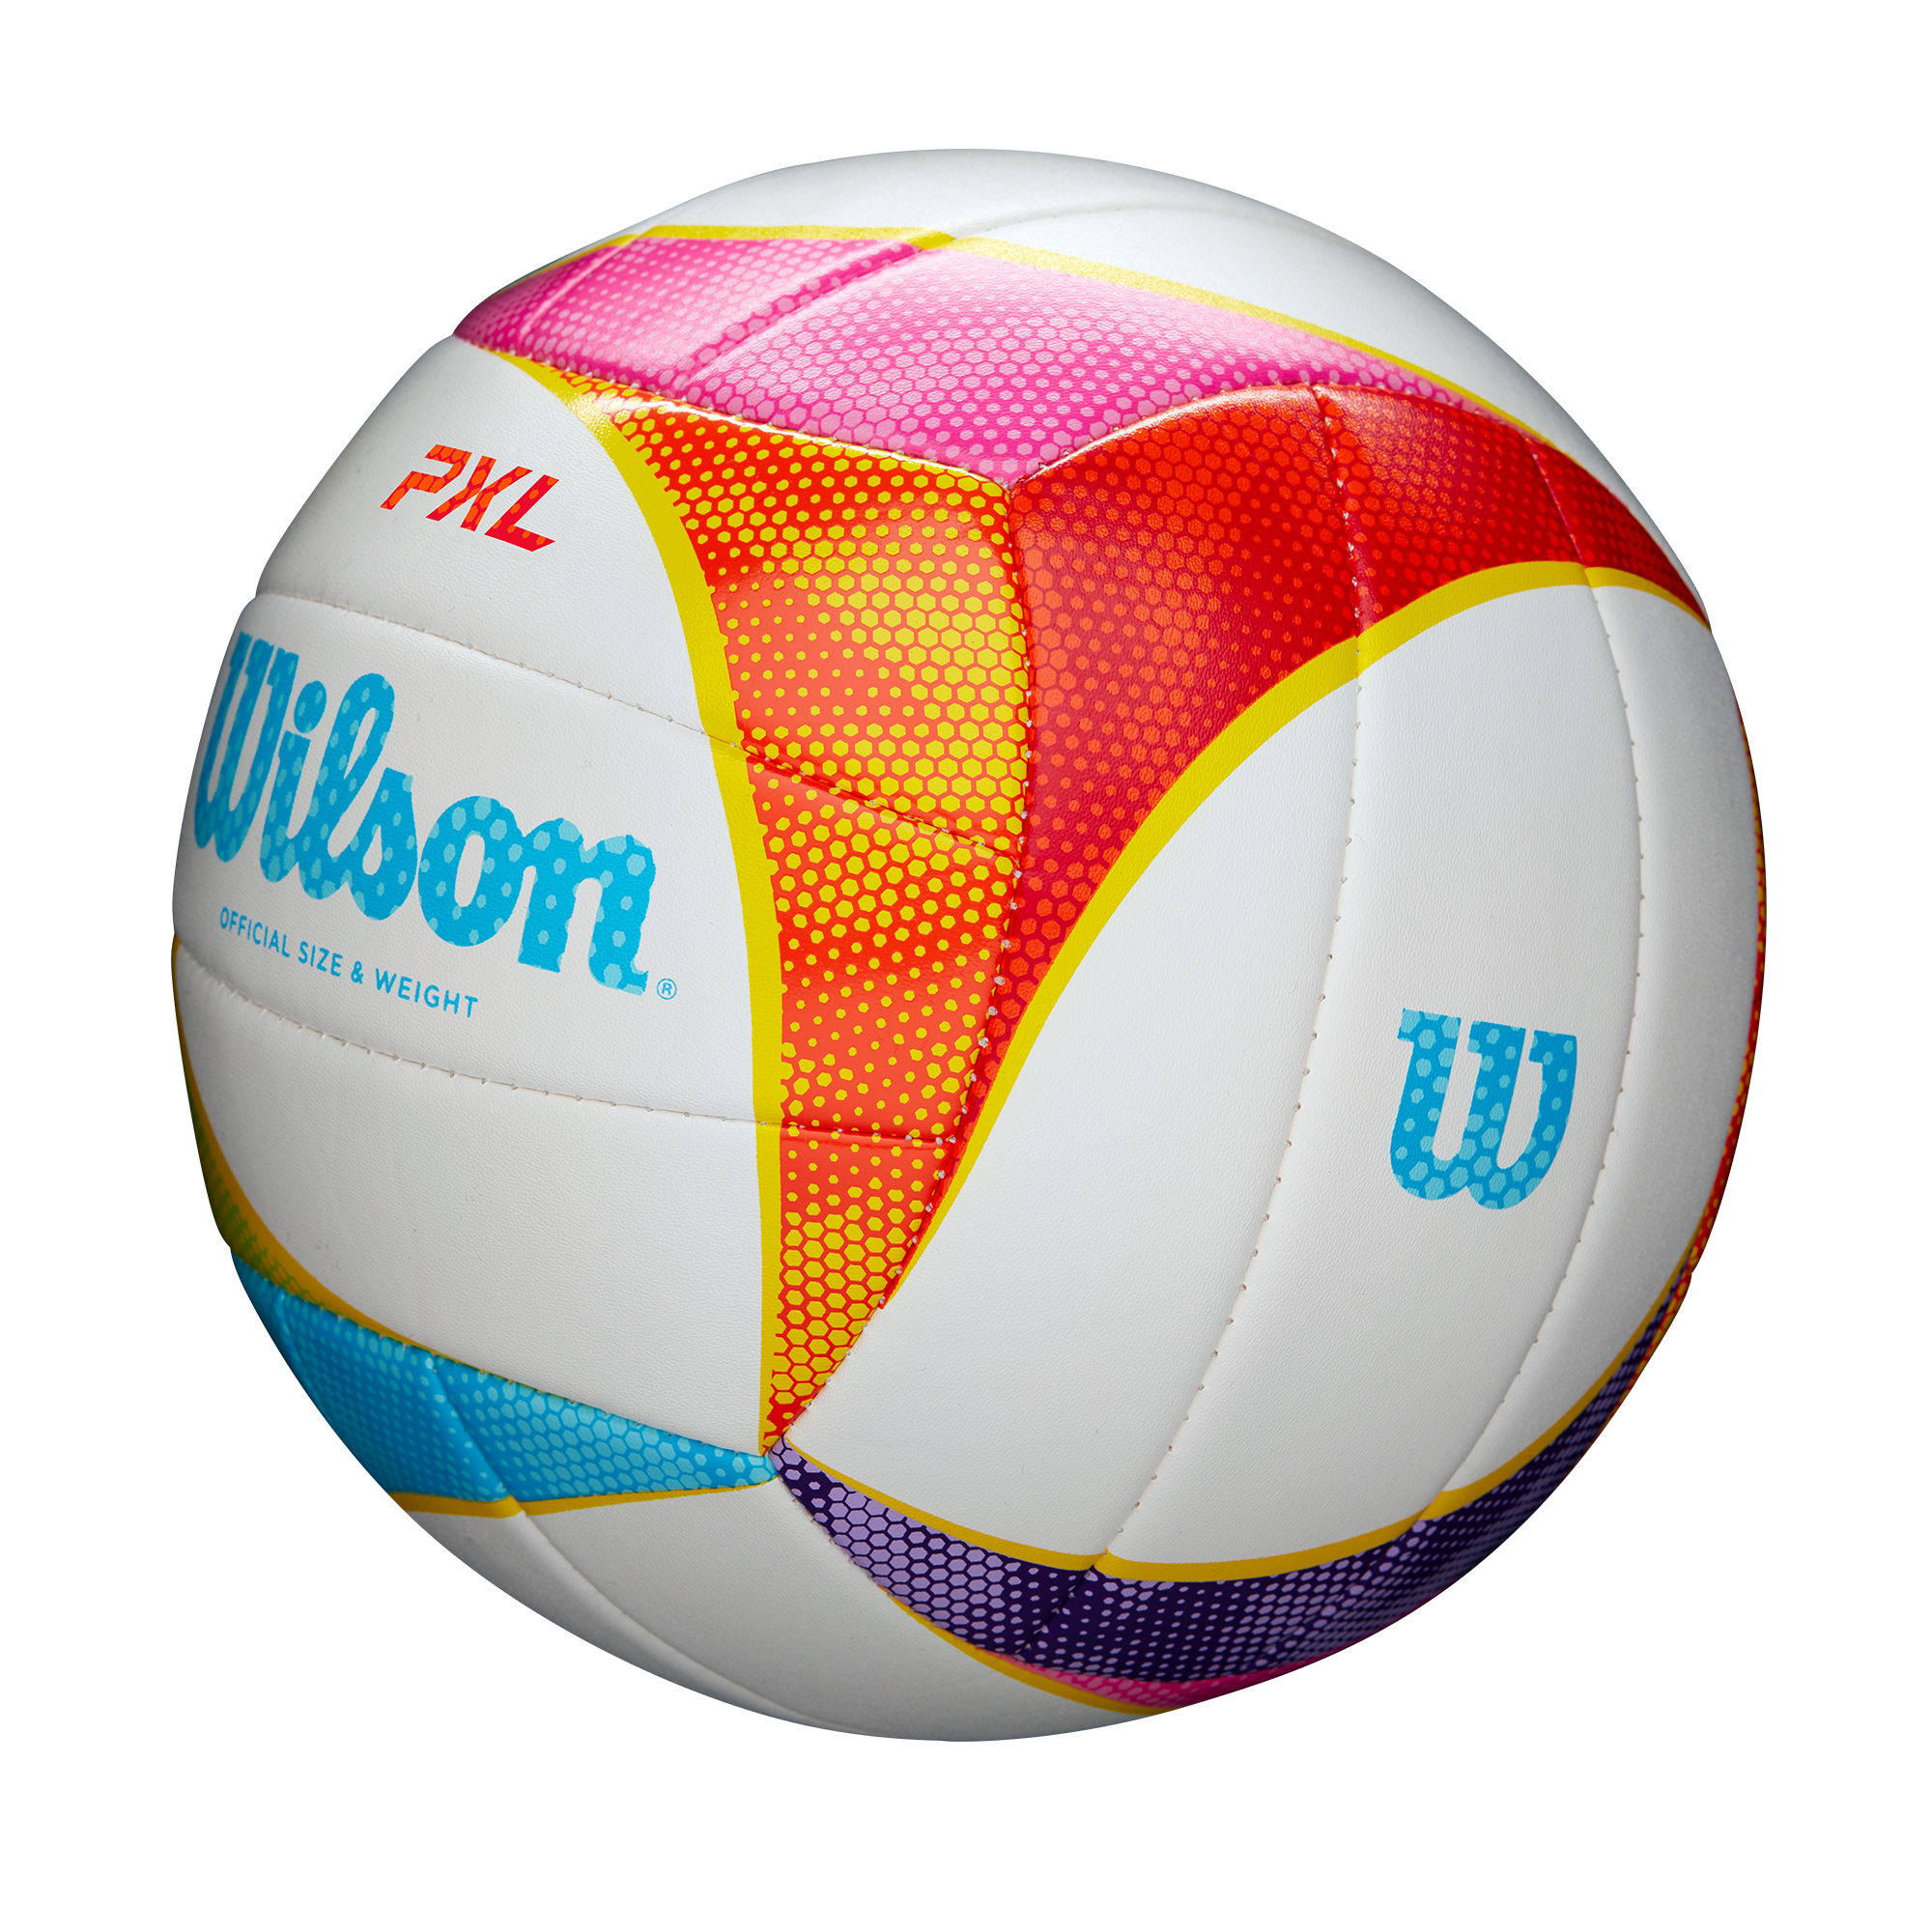 Volleyball 'PXL' Größe 5 + product picture